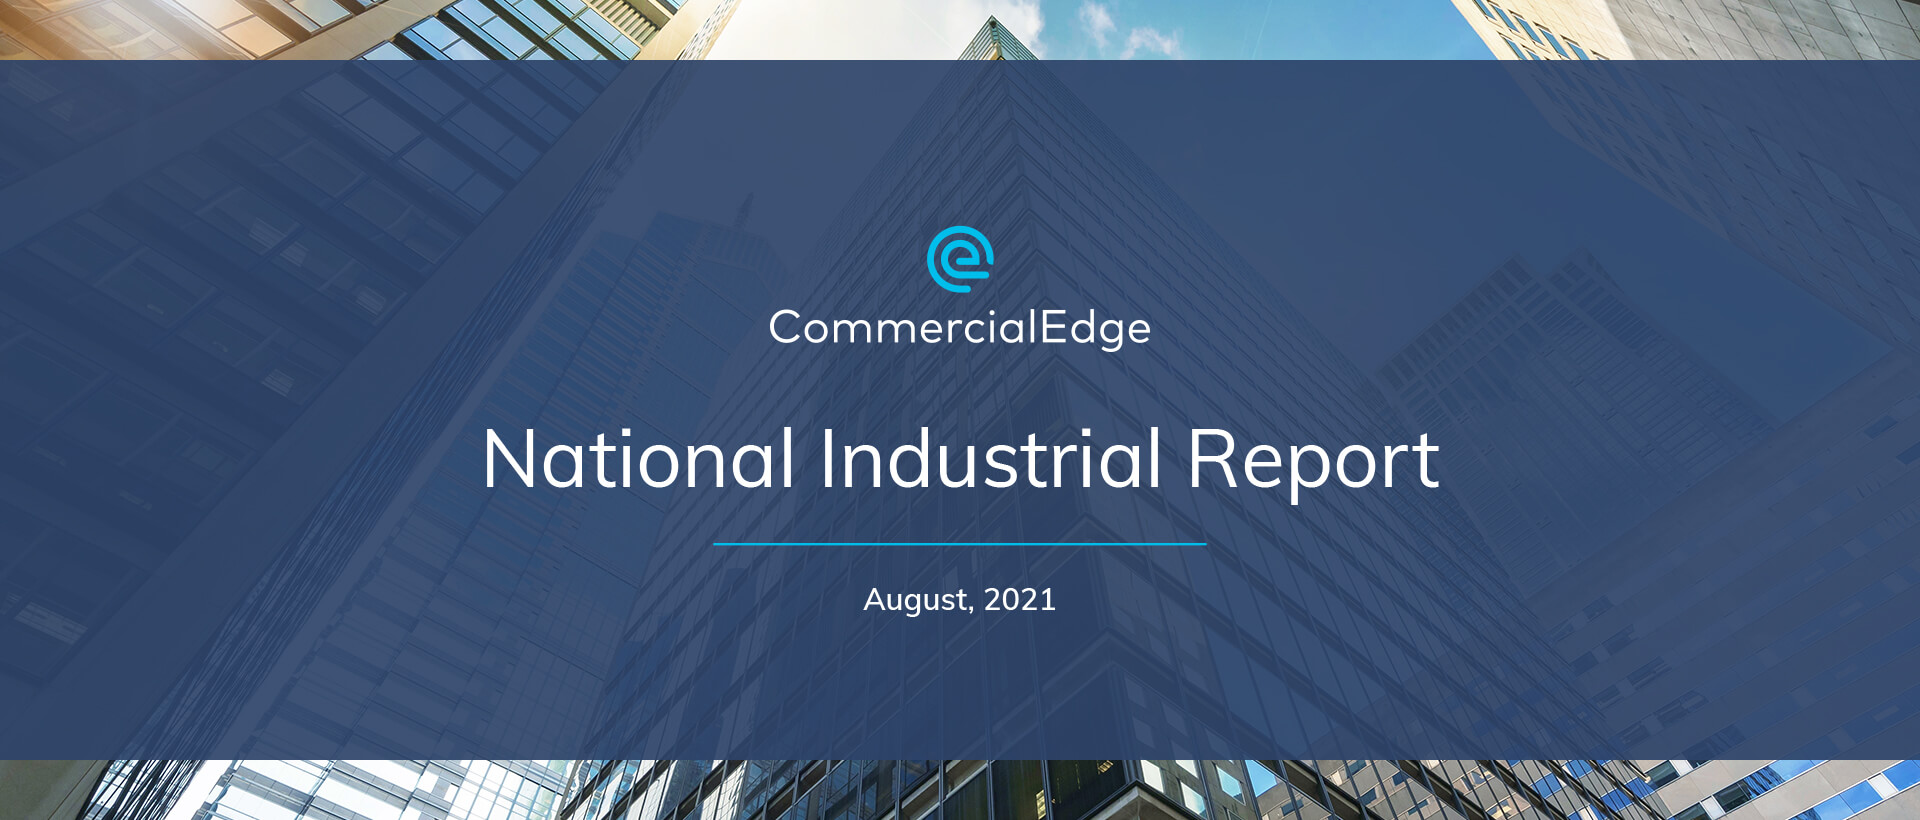 CommercialEdge National Industrial Report August 2021